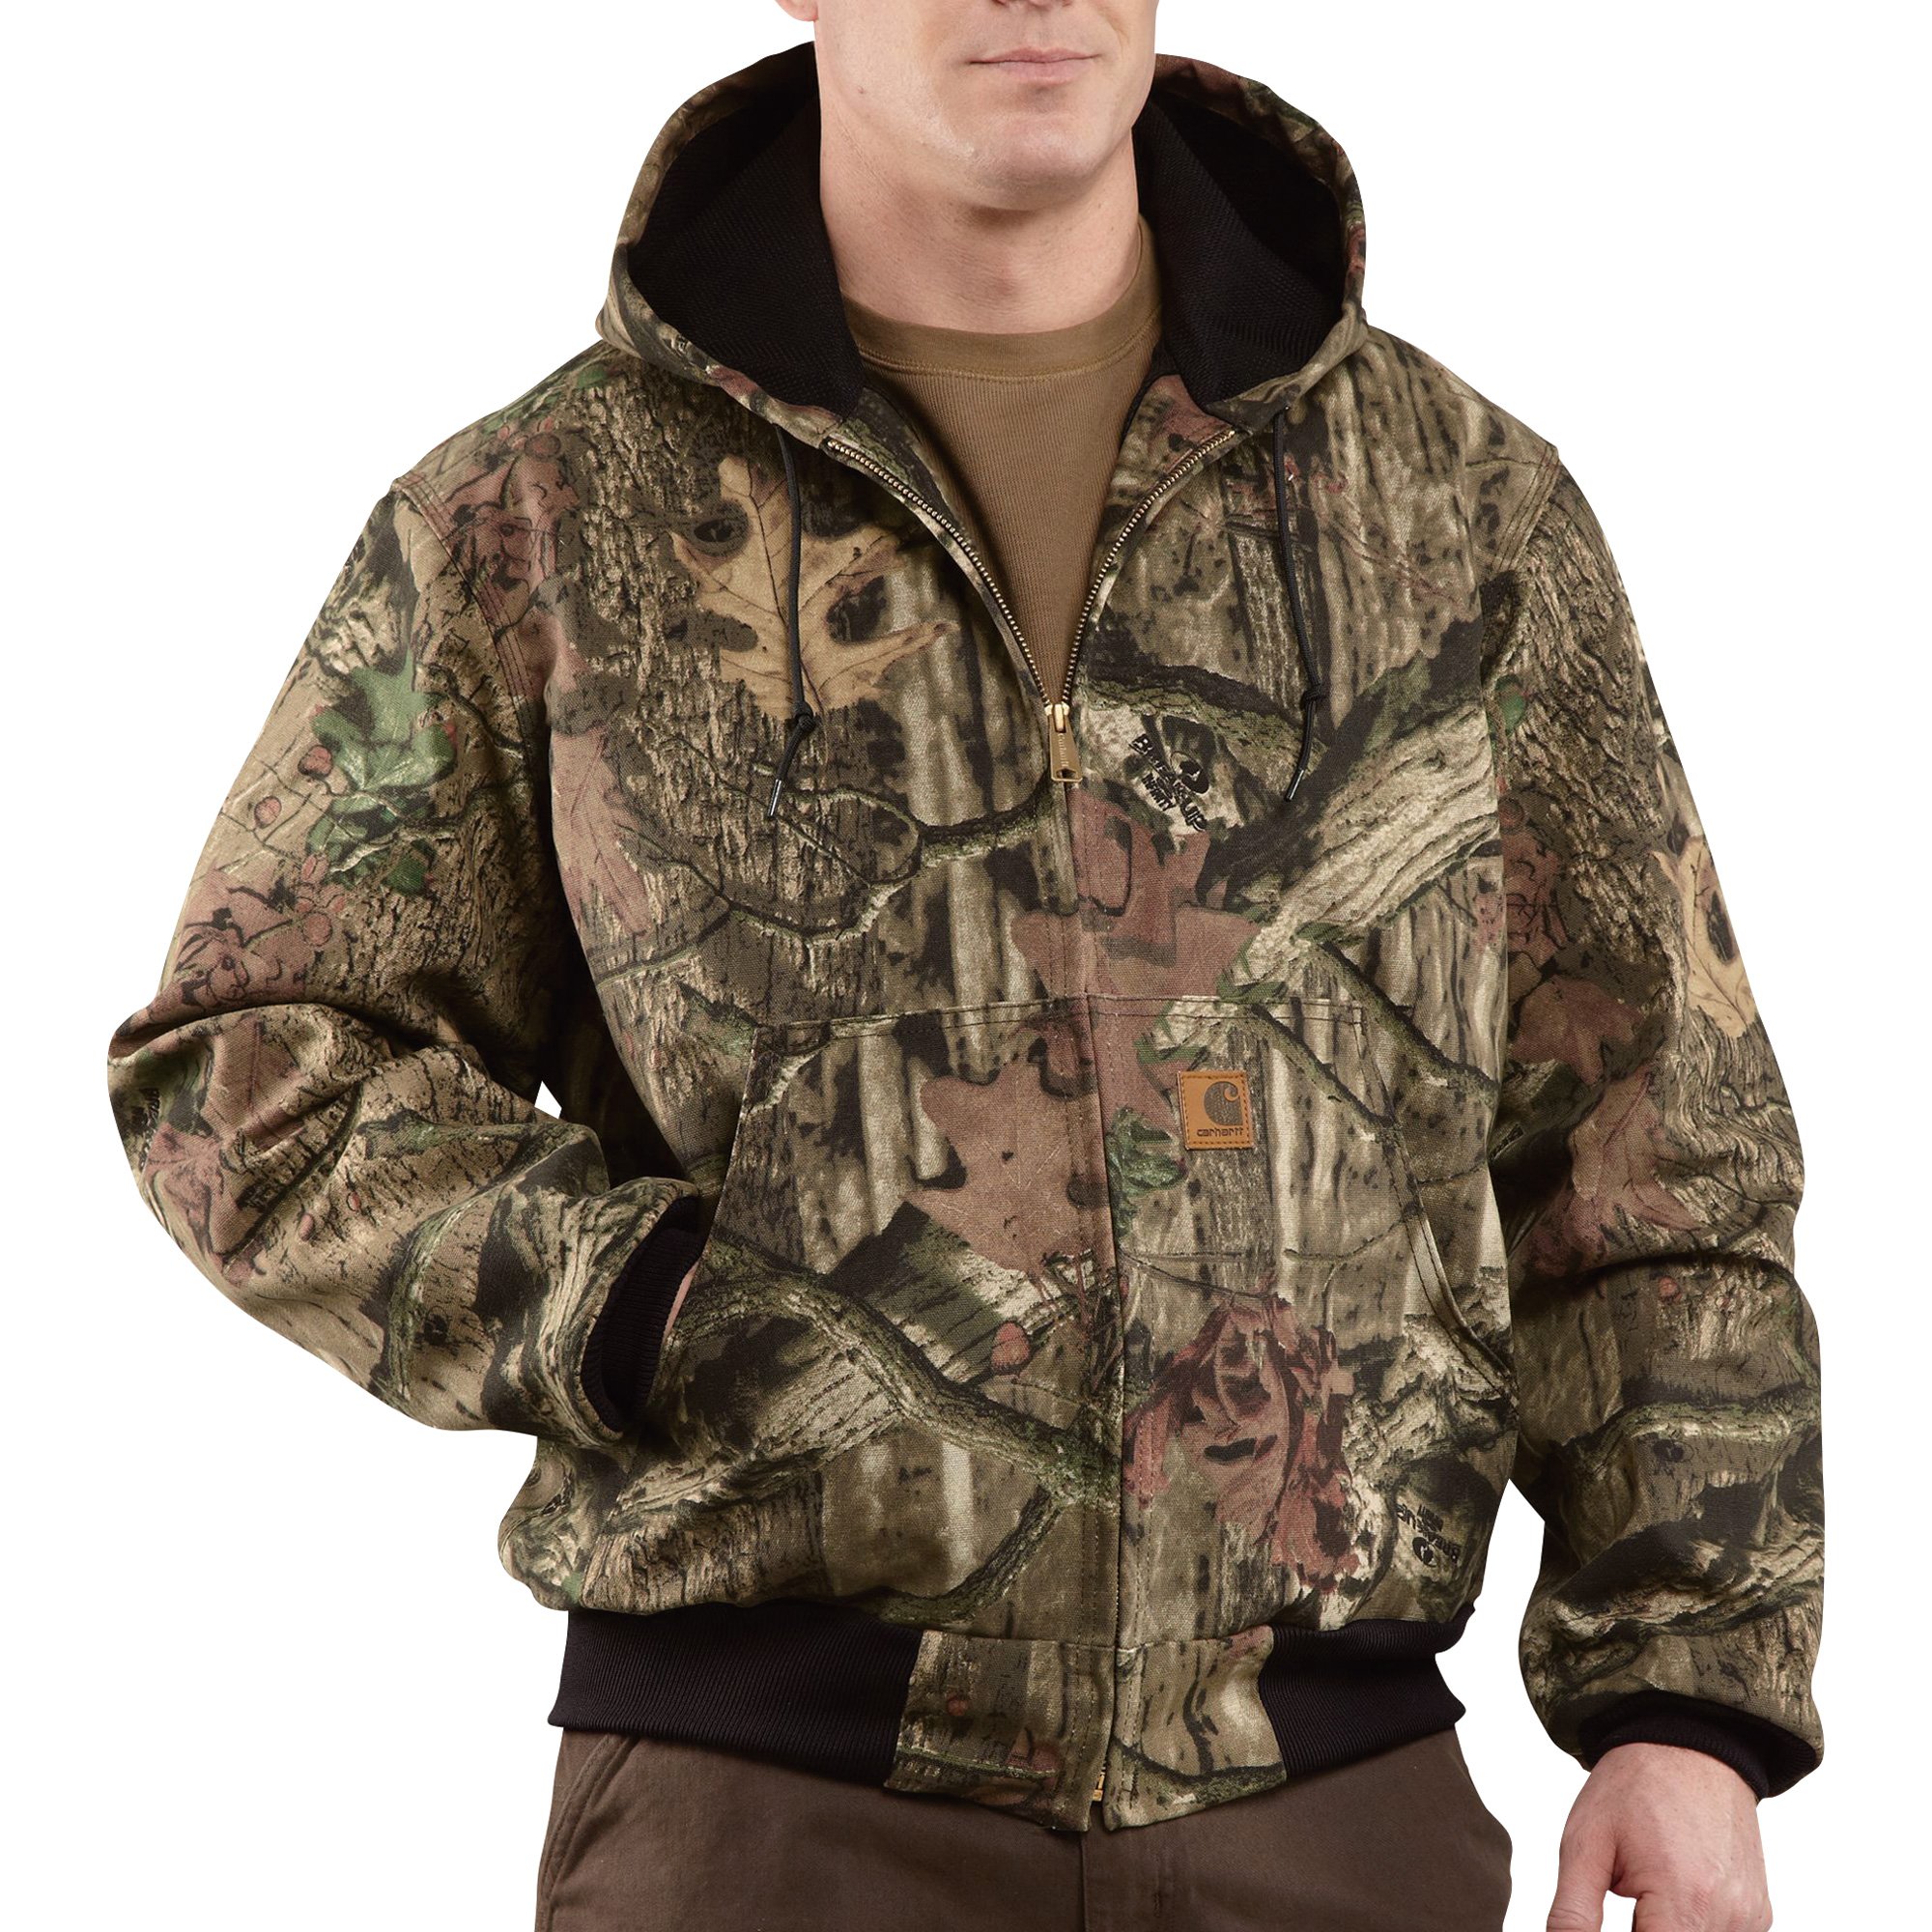 Carhartt Men's Quilted Flannel-Lined Camo Active Jacket - Realtree Camo,  Large, Model# J221